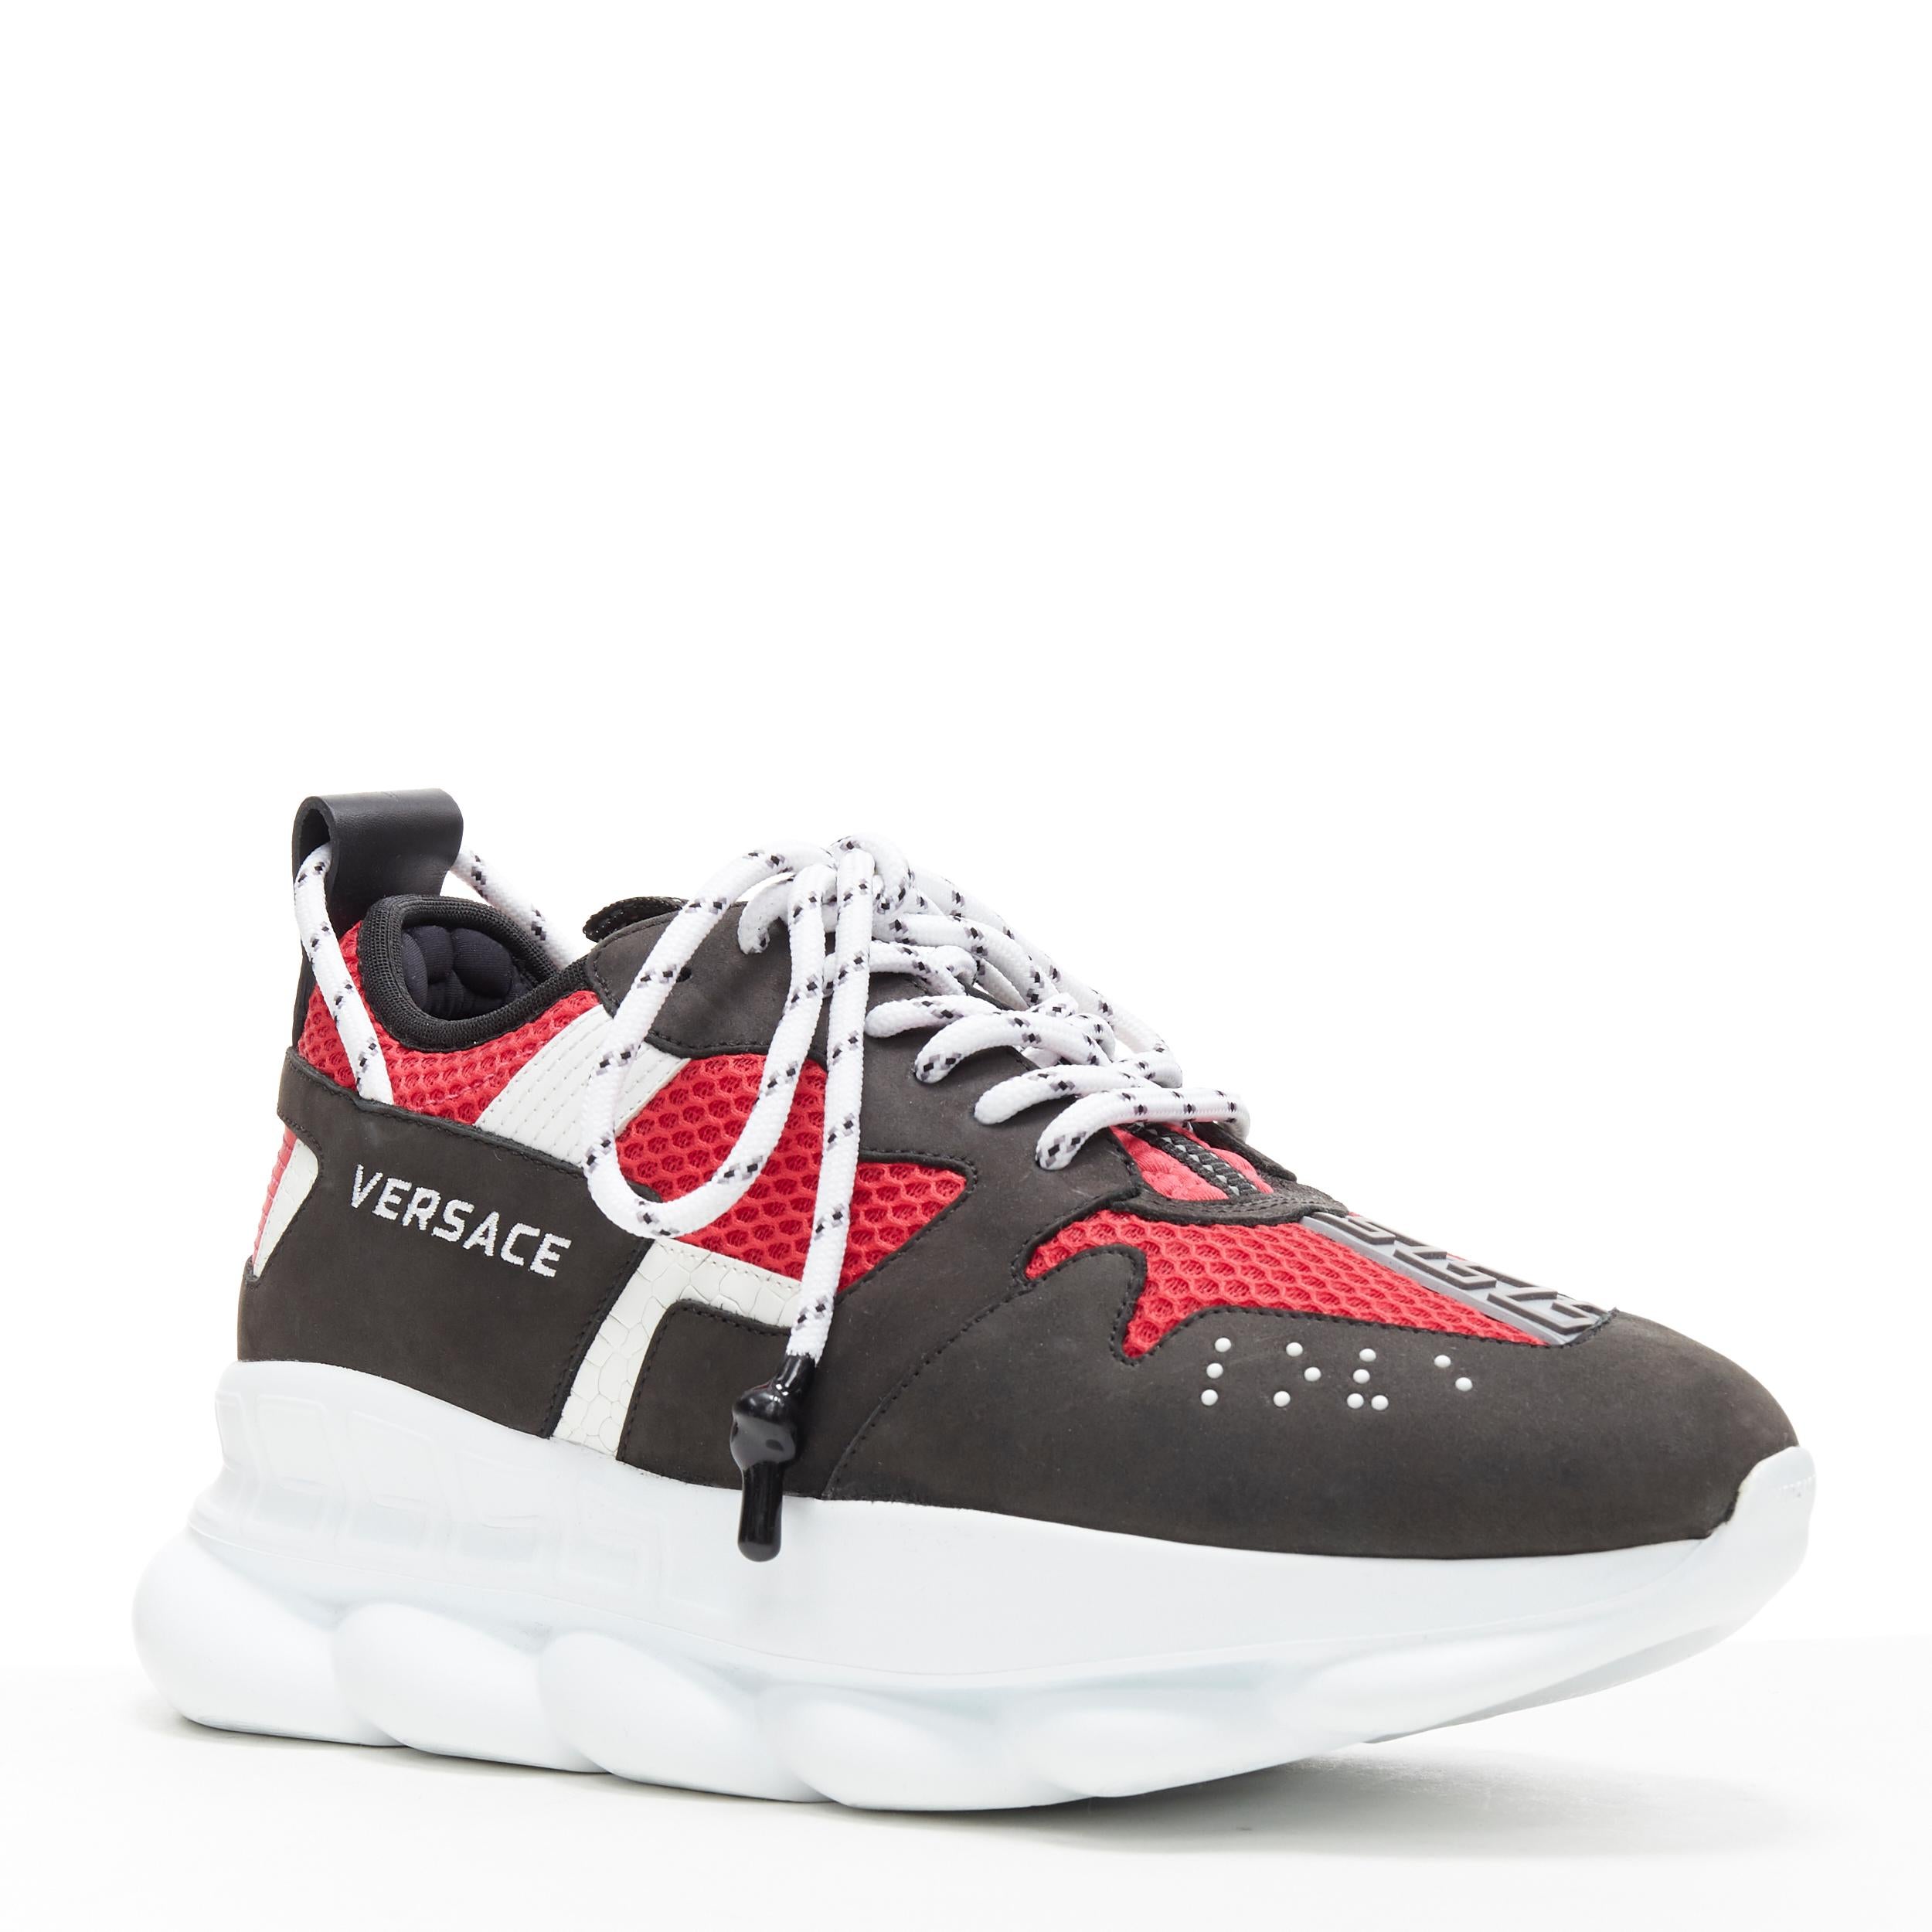 new VERSACE Chain Reaction black suede fuschia red low chunky sneaker EU37 US7 
Reference: TGAS/A06297 
Brand: Versace 
Designer: Salehe Bembury 
Model: Chain Reaction Black Red 
Material: Leather 
Color: Black 
Pattern: Solid 
Closure: Lace up